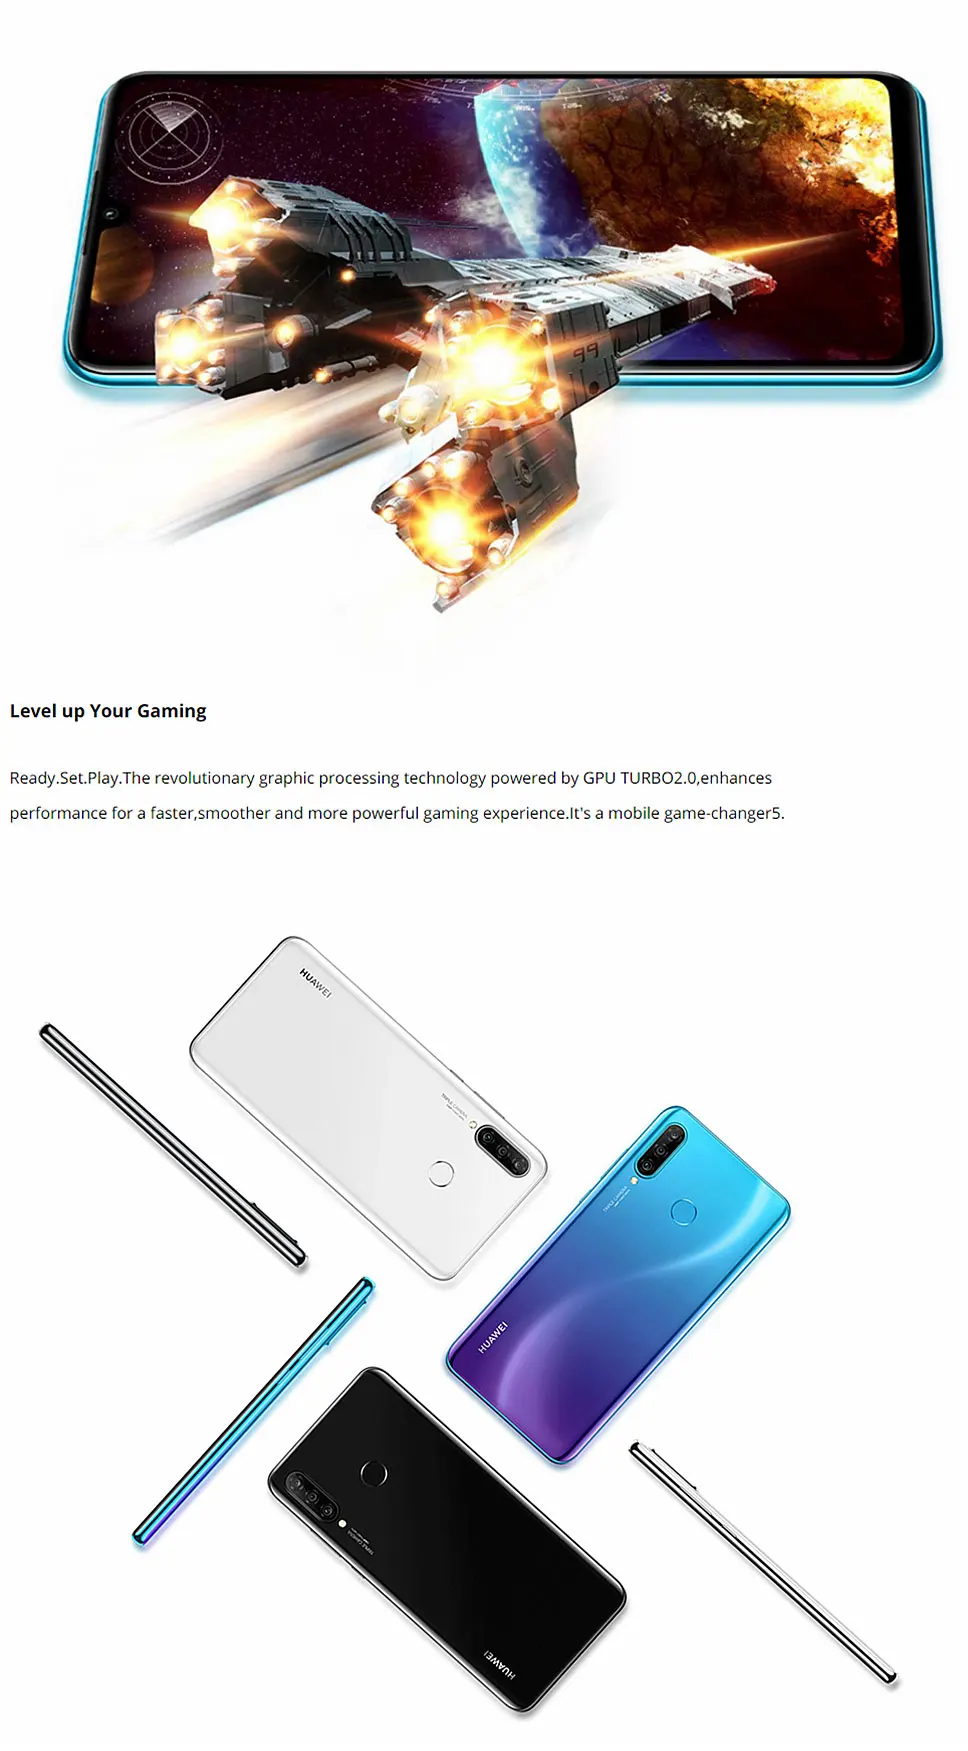 Original Global Version Huawei P30 Lite 4GB 128GB Mobile Phone 6.15 inch Smartphone 32MP 4*Cameras With Google Pay Android 9.0